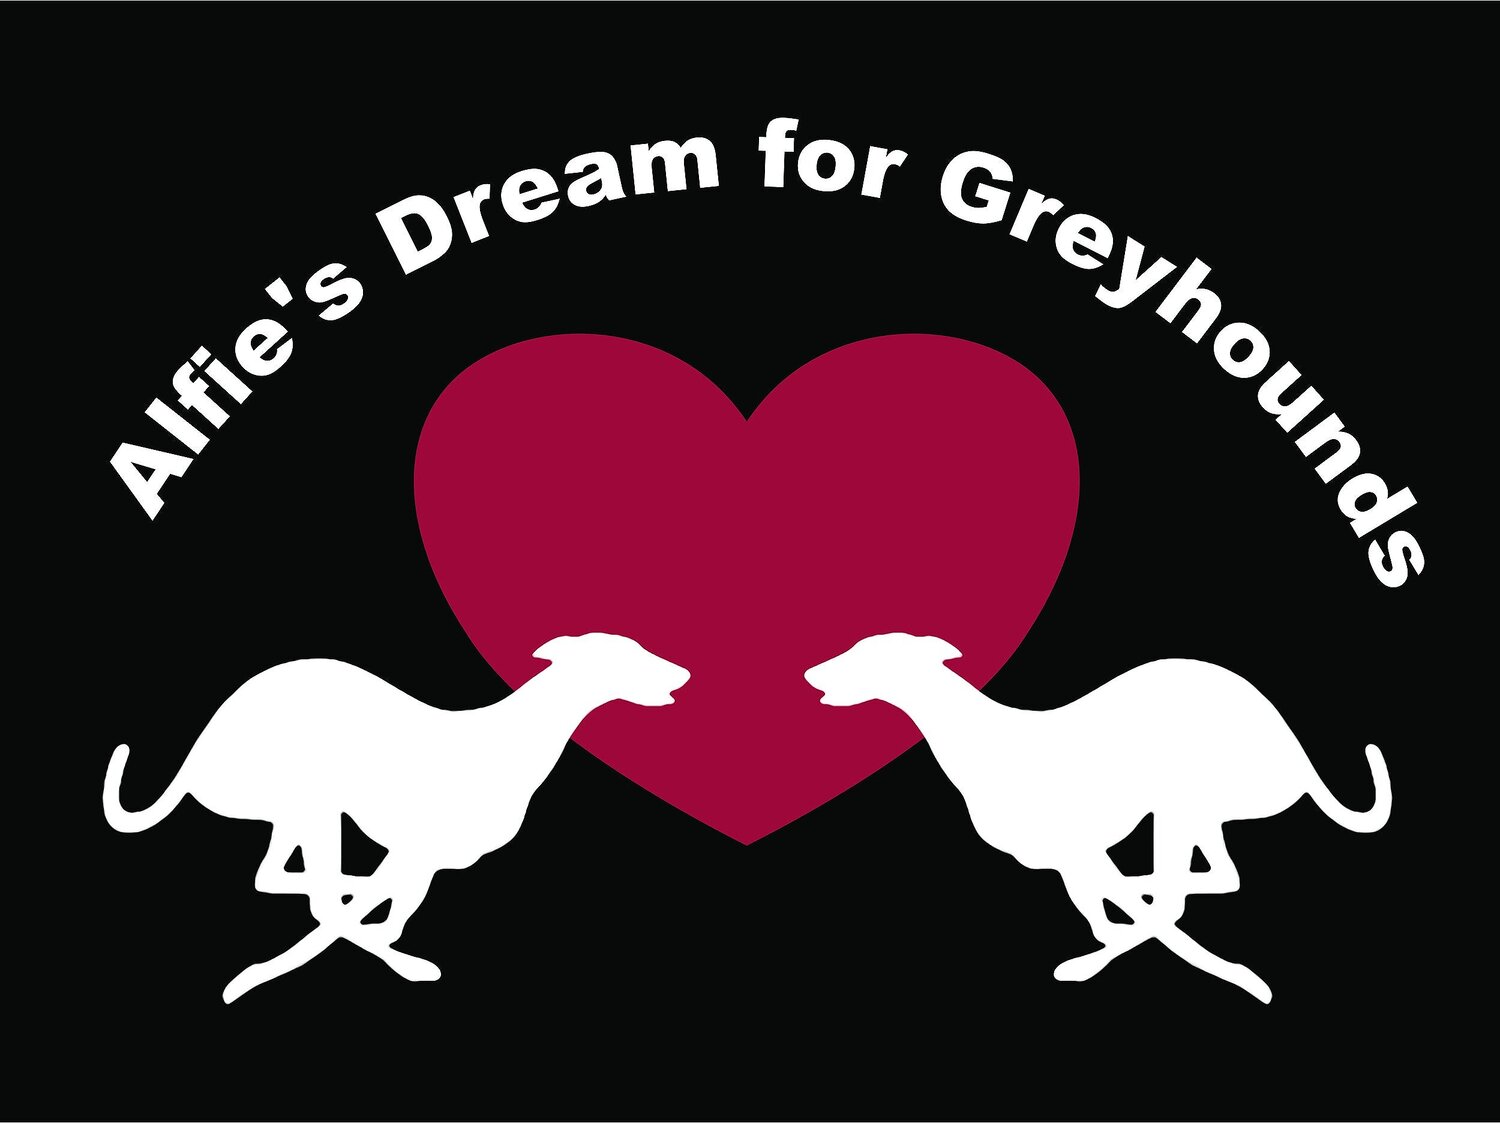 Alfies dream for greyhounds